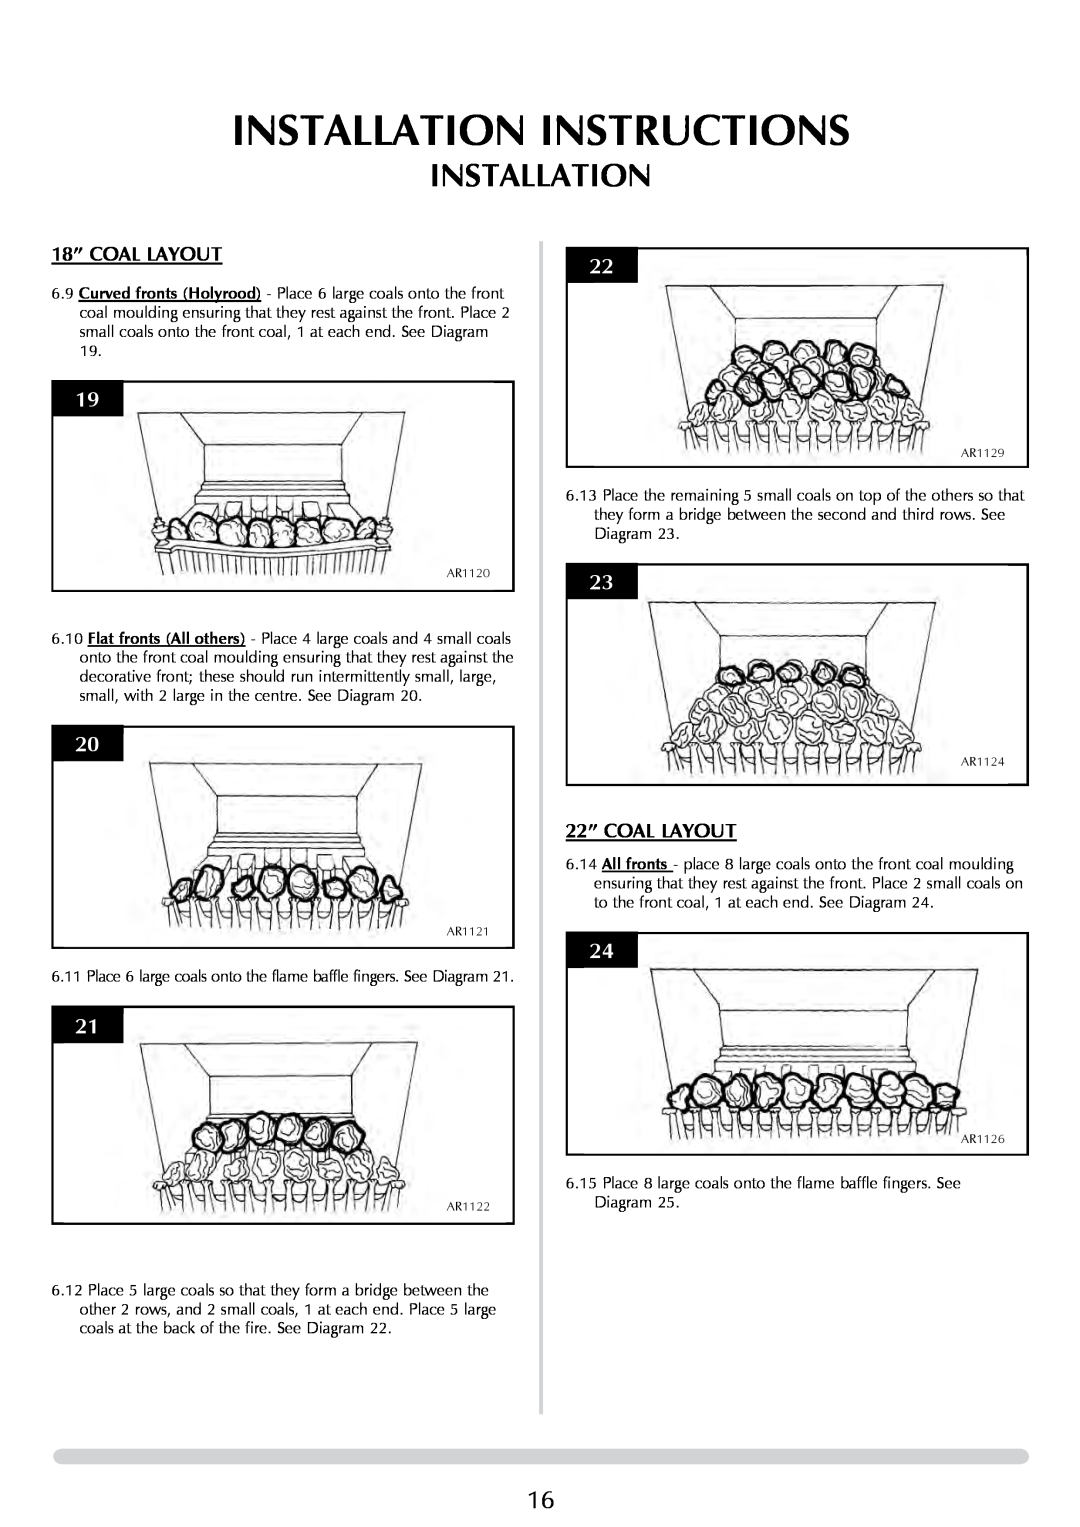 Stovax 8455 manual Installation Instructions, 18” COAL LAYOUT, 22” COAL LAYOUT 